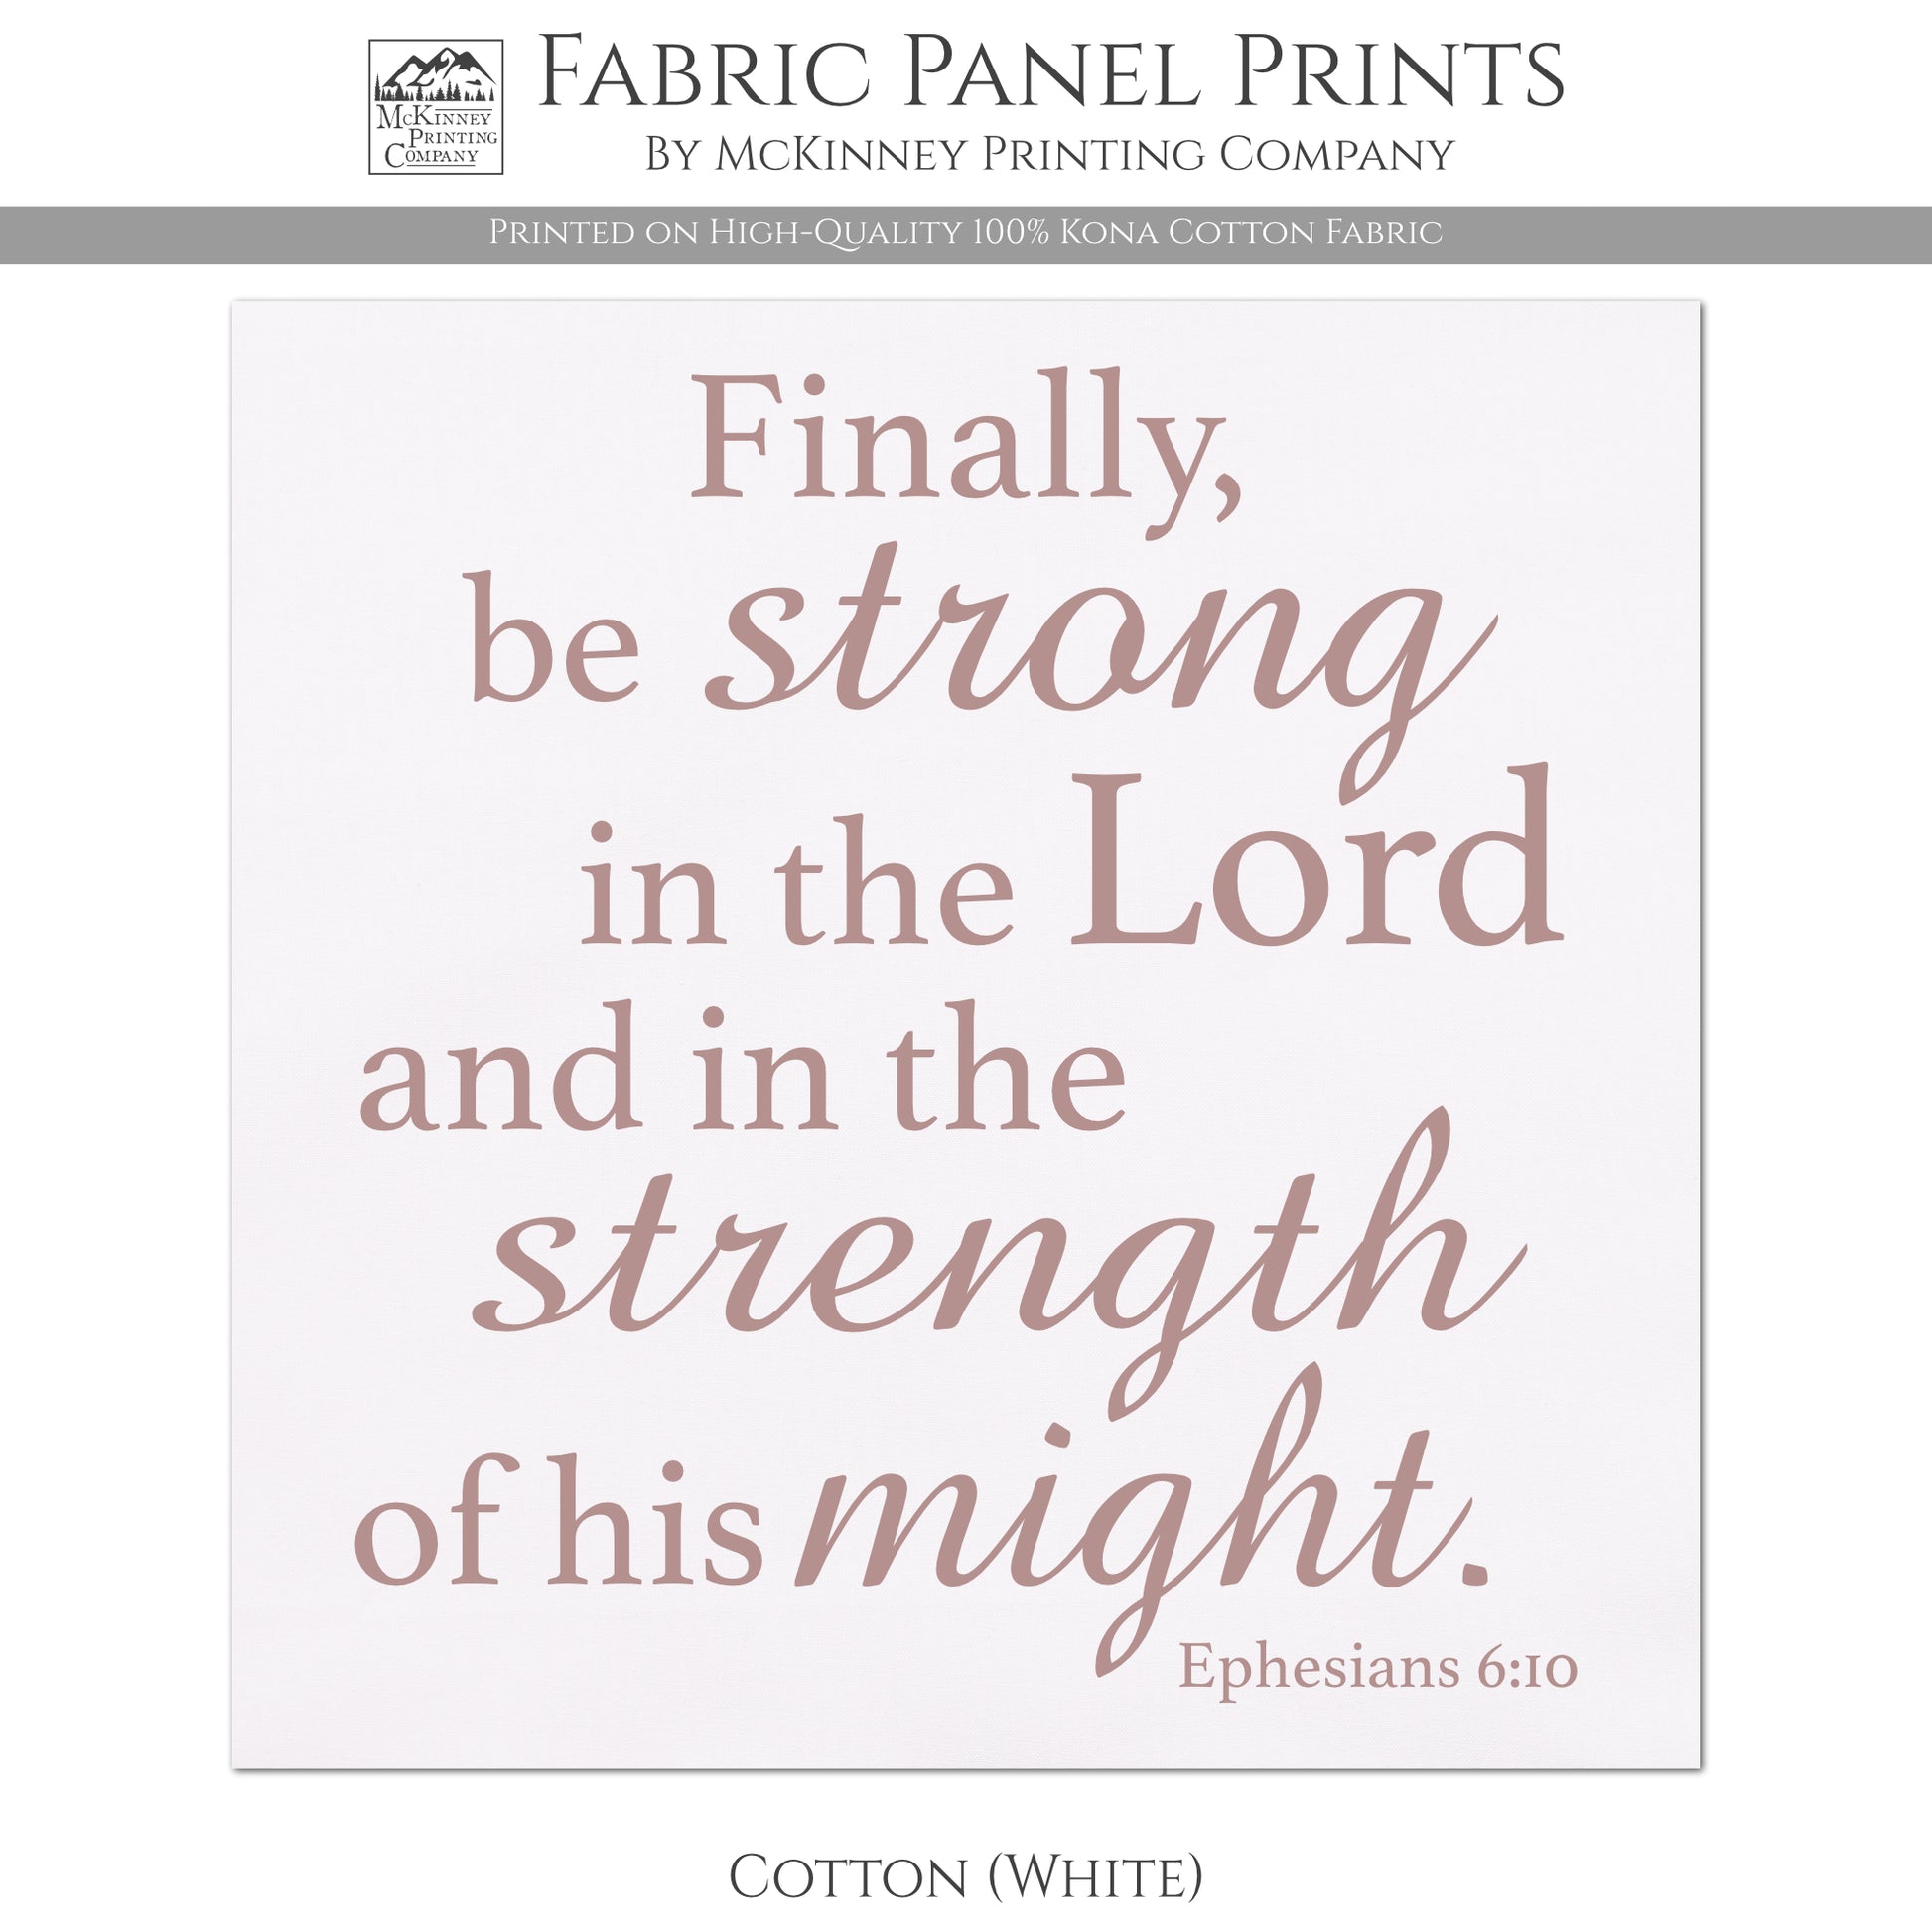 Finally be strong in the Lord and in the strength of his might - Ephesians 6:10 - Fabric Panel Print - Kona Cotton Fabric, White